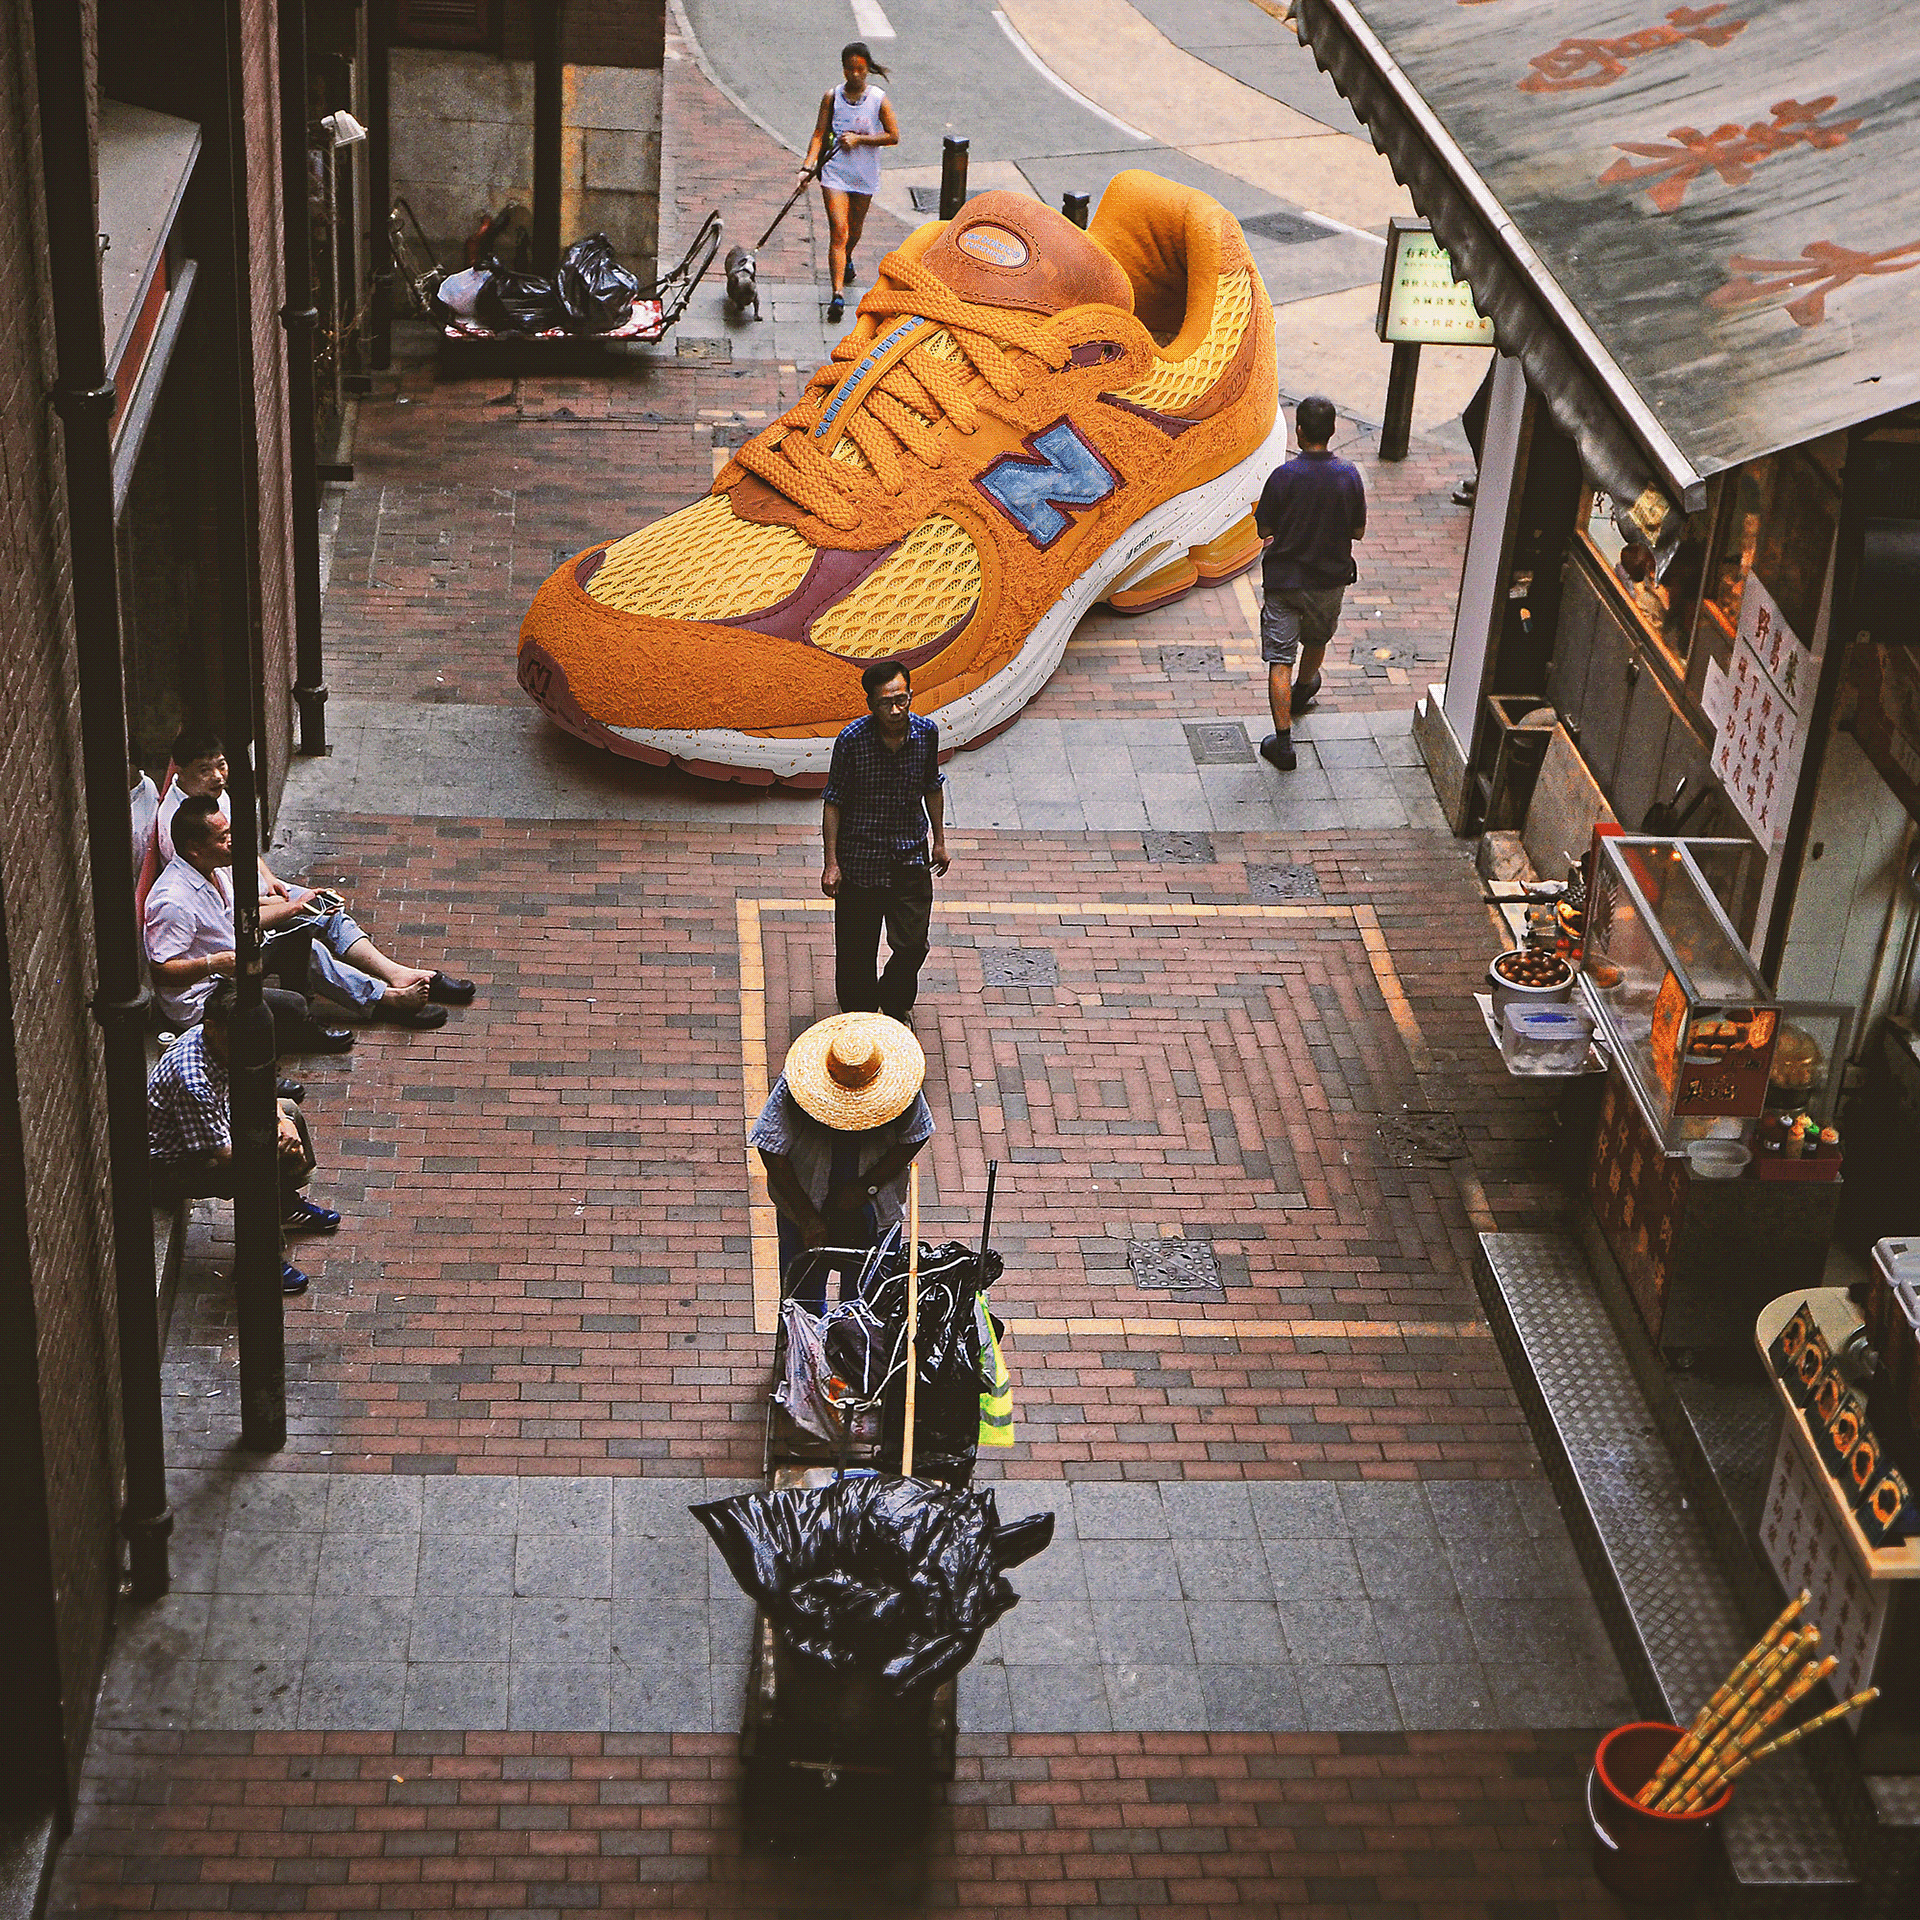 This is a photo composite made with Photoshop of a giant sneaker at an asian alleyway.